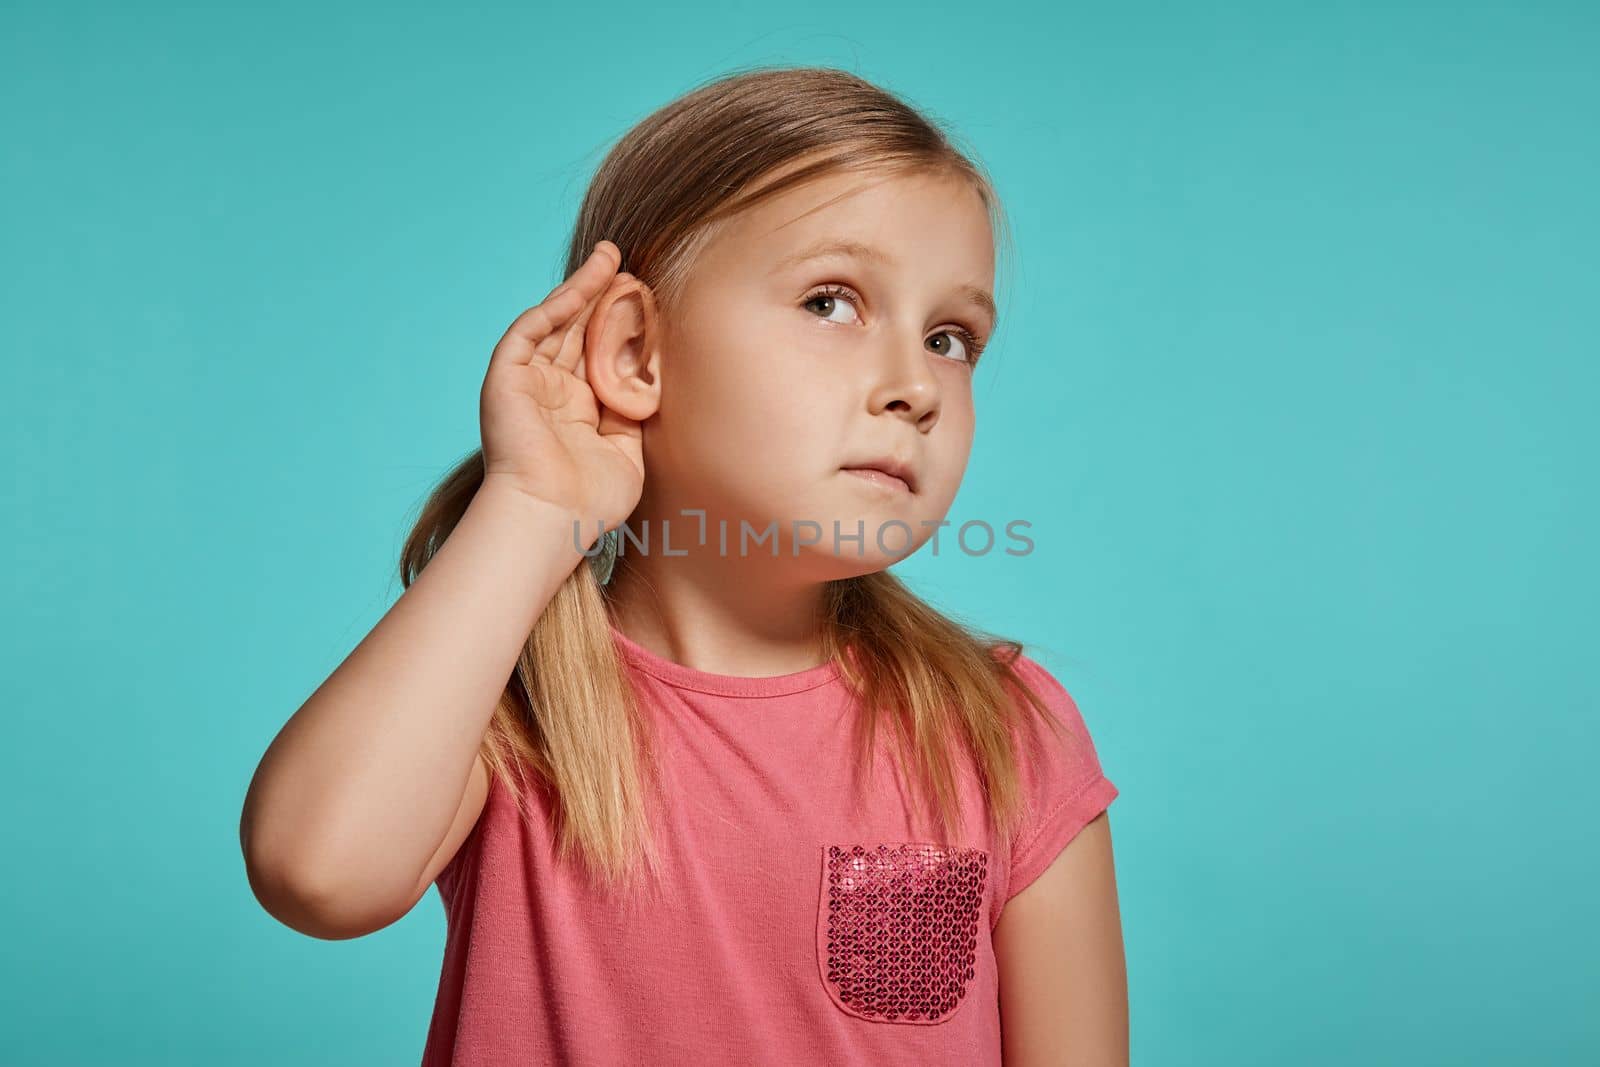 Close-up shot of a nice blonde little female with two ponytails on her head, in a pink dress, acting like listening to something while posing against a blue background with copy space. Concept of a joyful childhood.